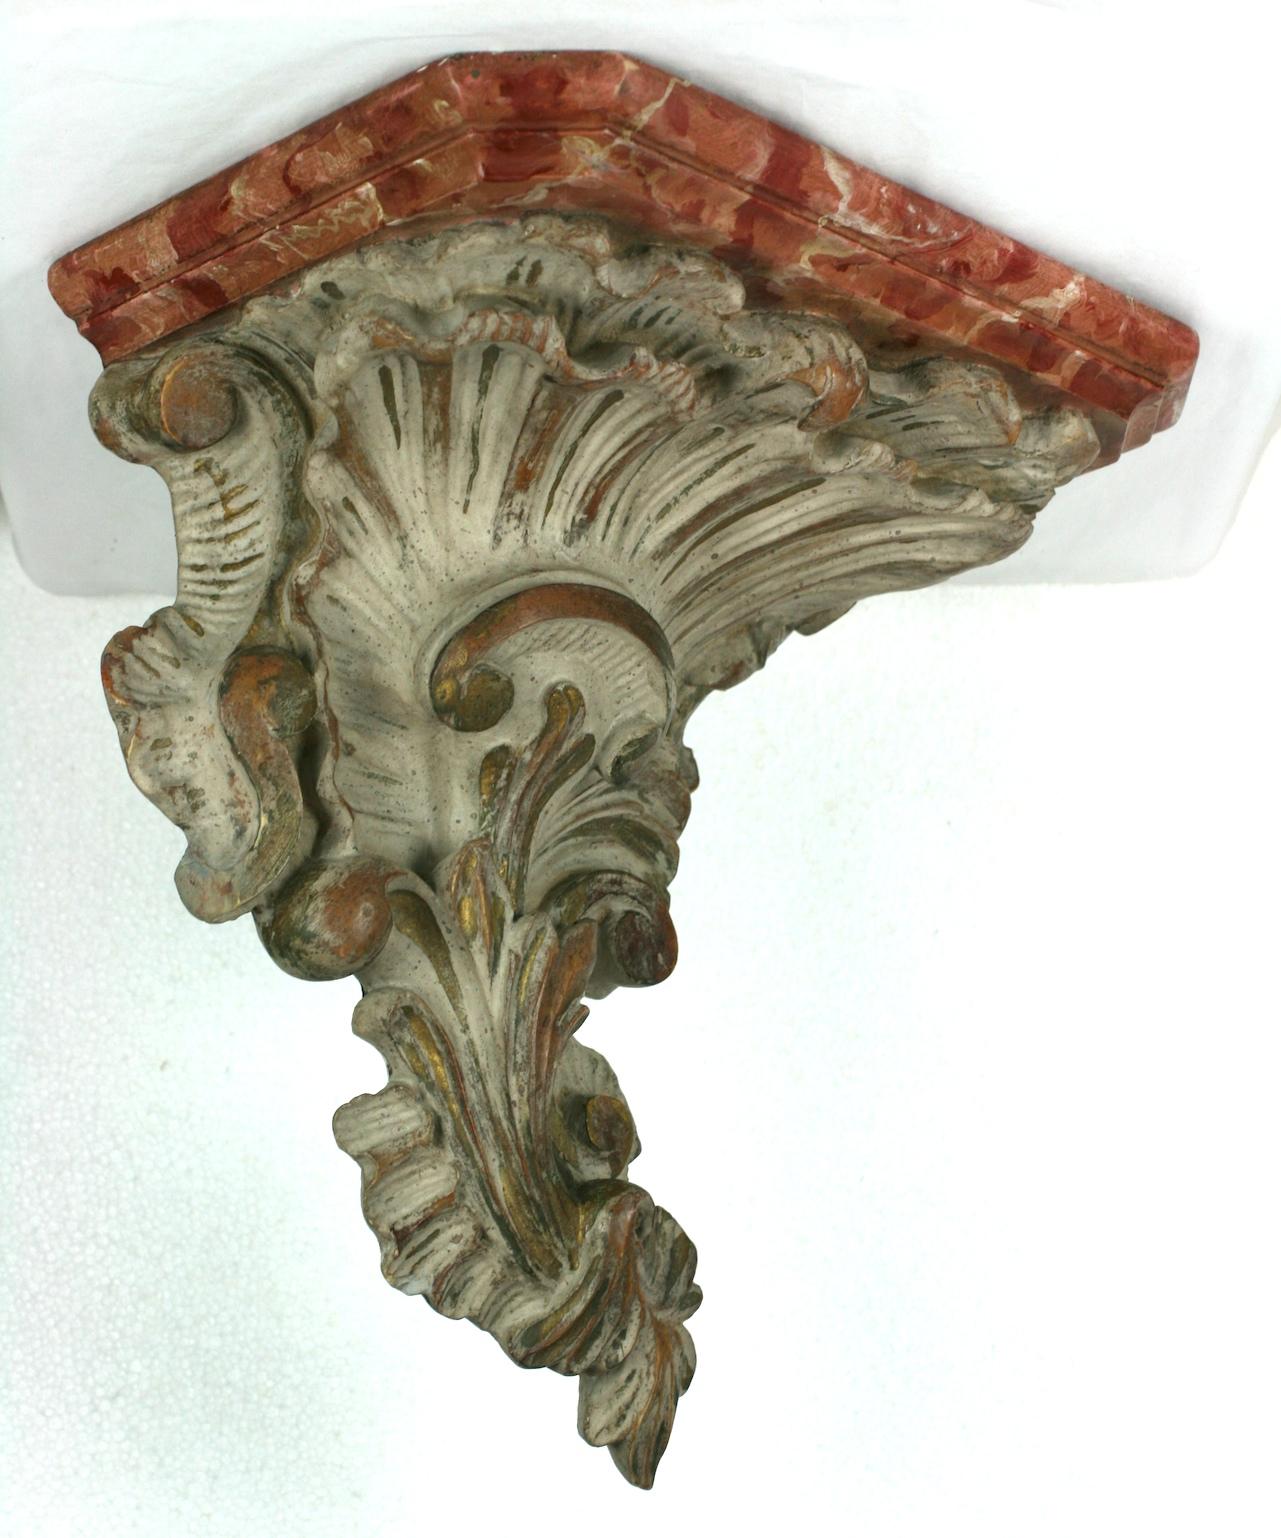 Venetian style faux marble bracket of cast plaster, beautifully paint decorated with gilt highlights on ivory. The top is painted in a faux marble technique for a rosy marble effect,
1930s, European.